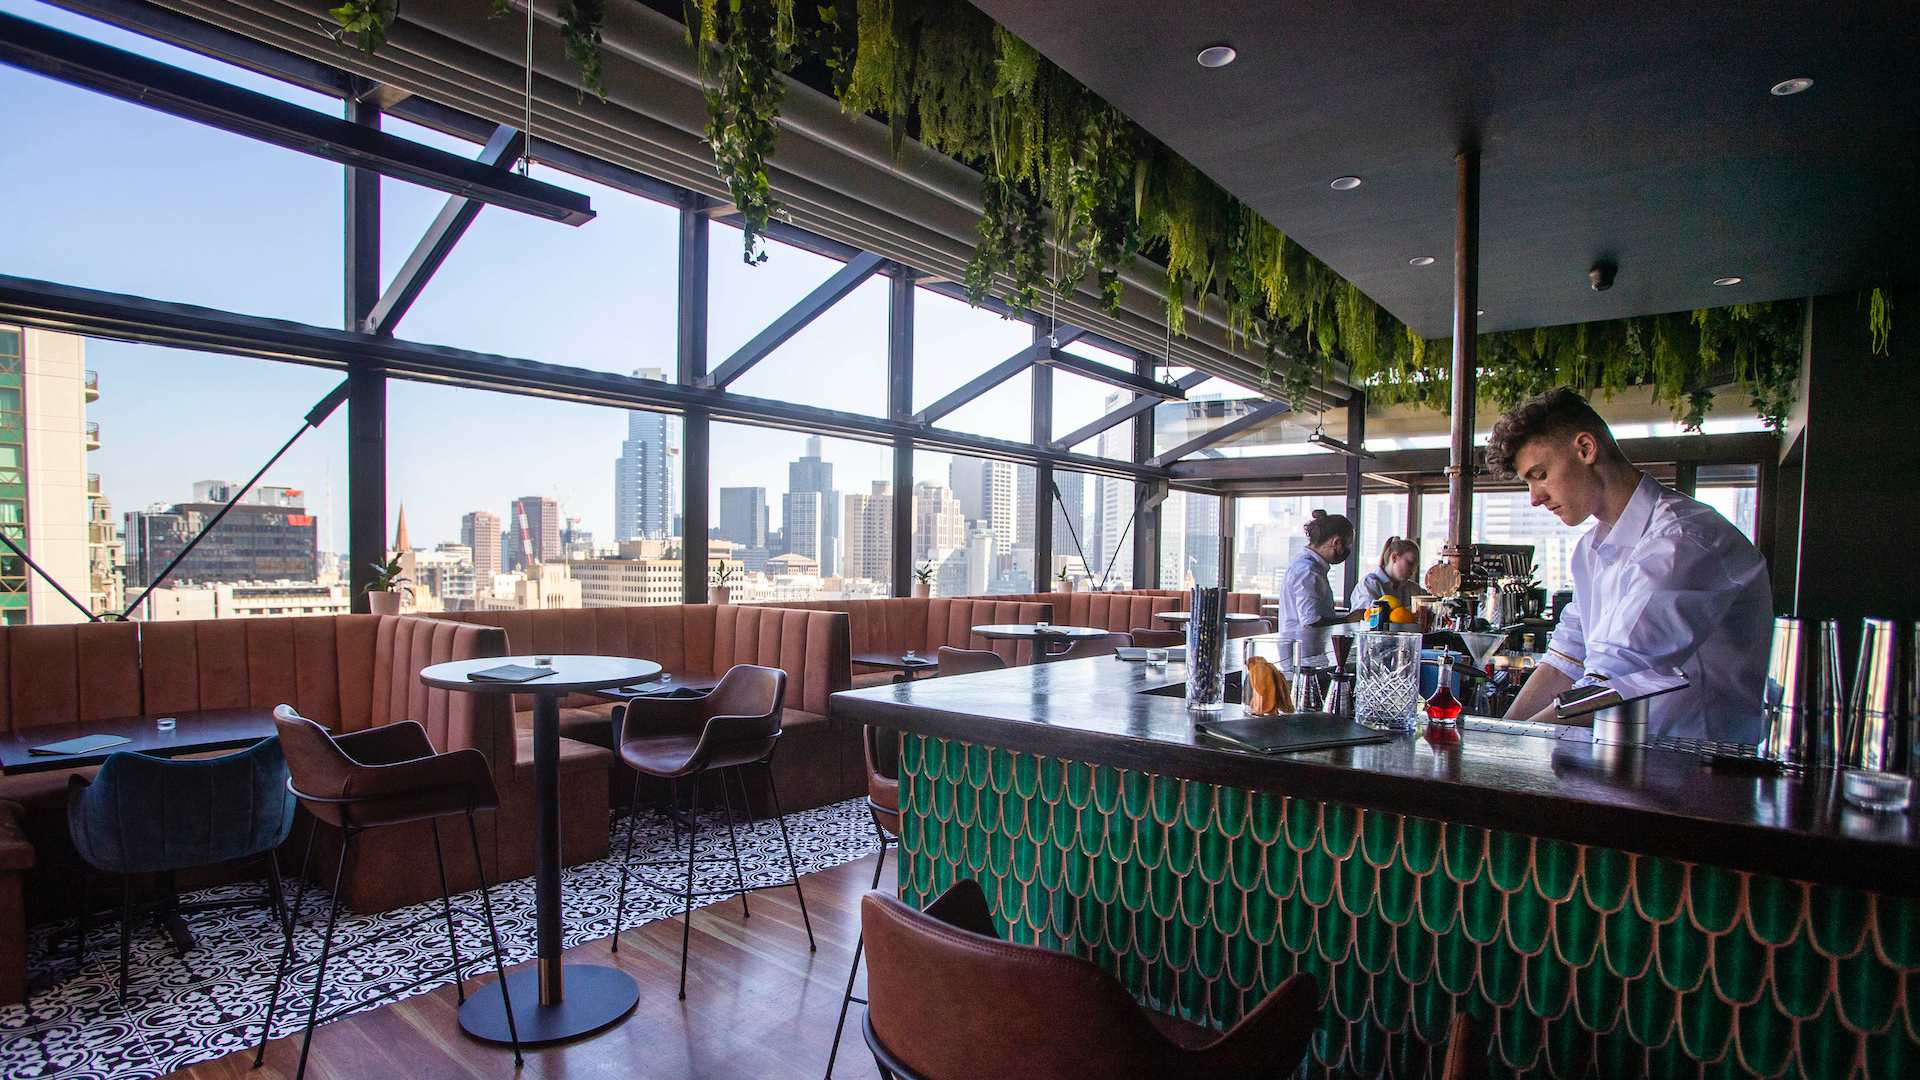 Fable Is Melbourne's Highest Rooftop Bar and the City's Newest Drinking Destination